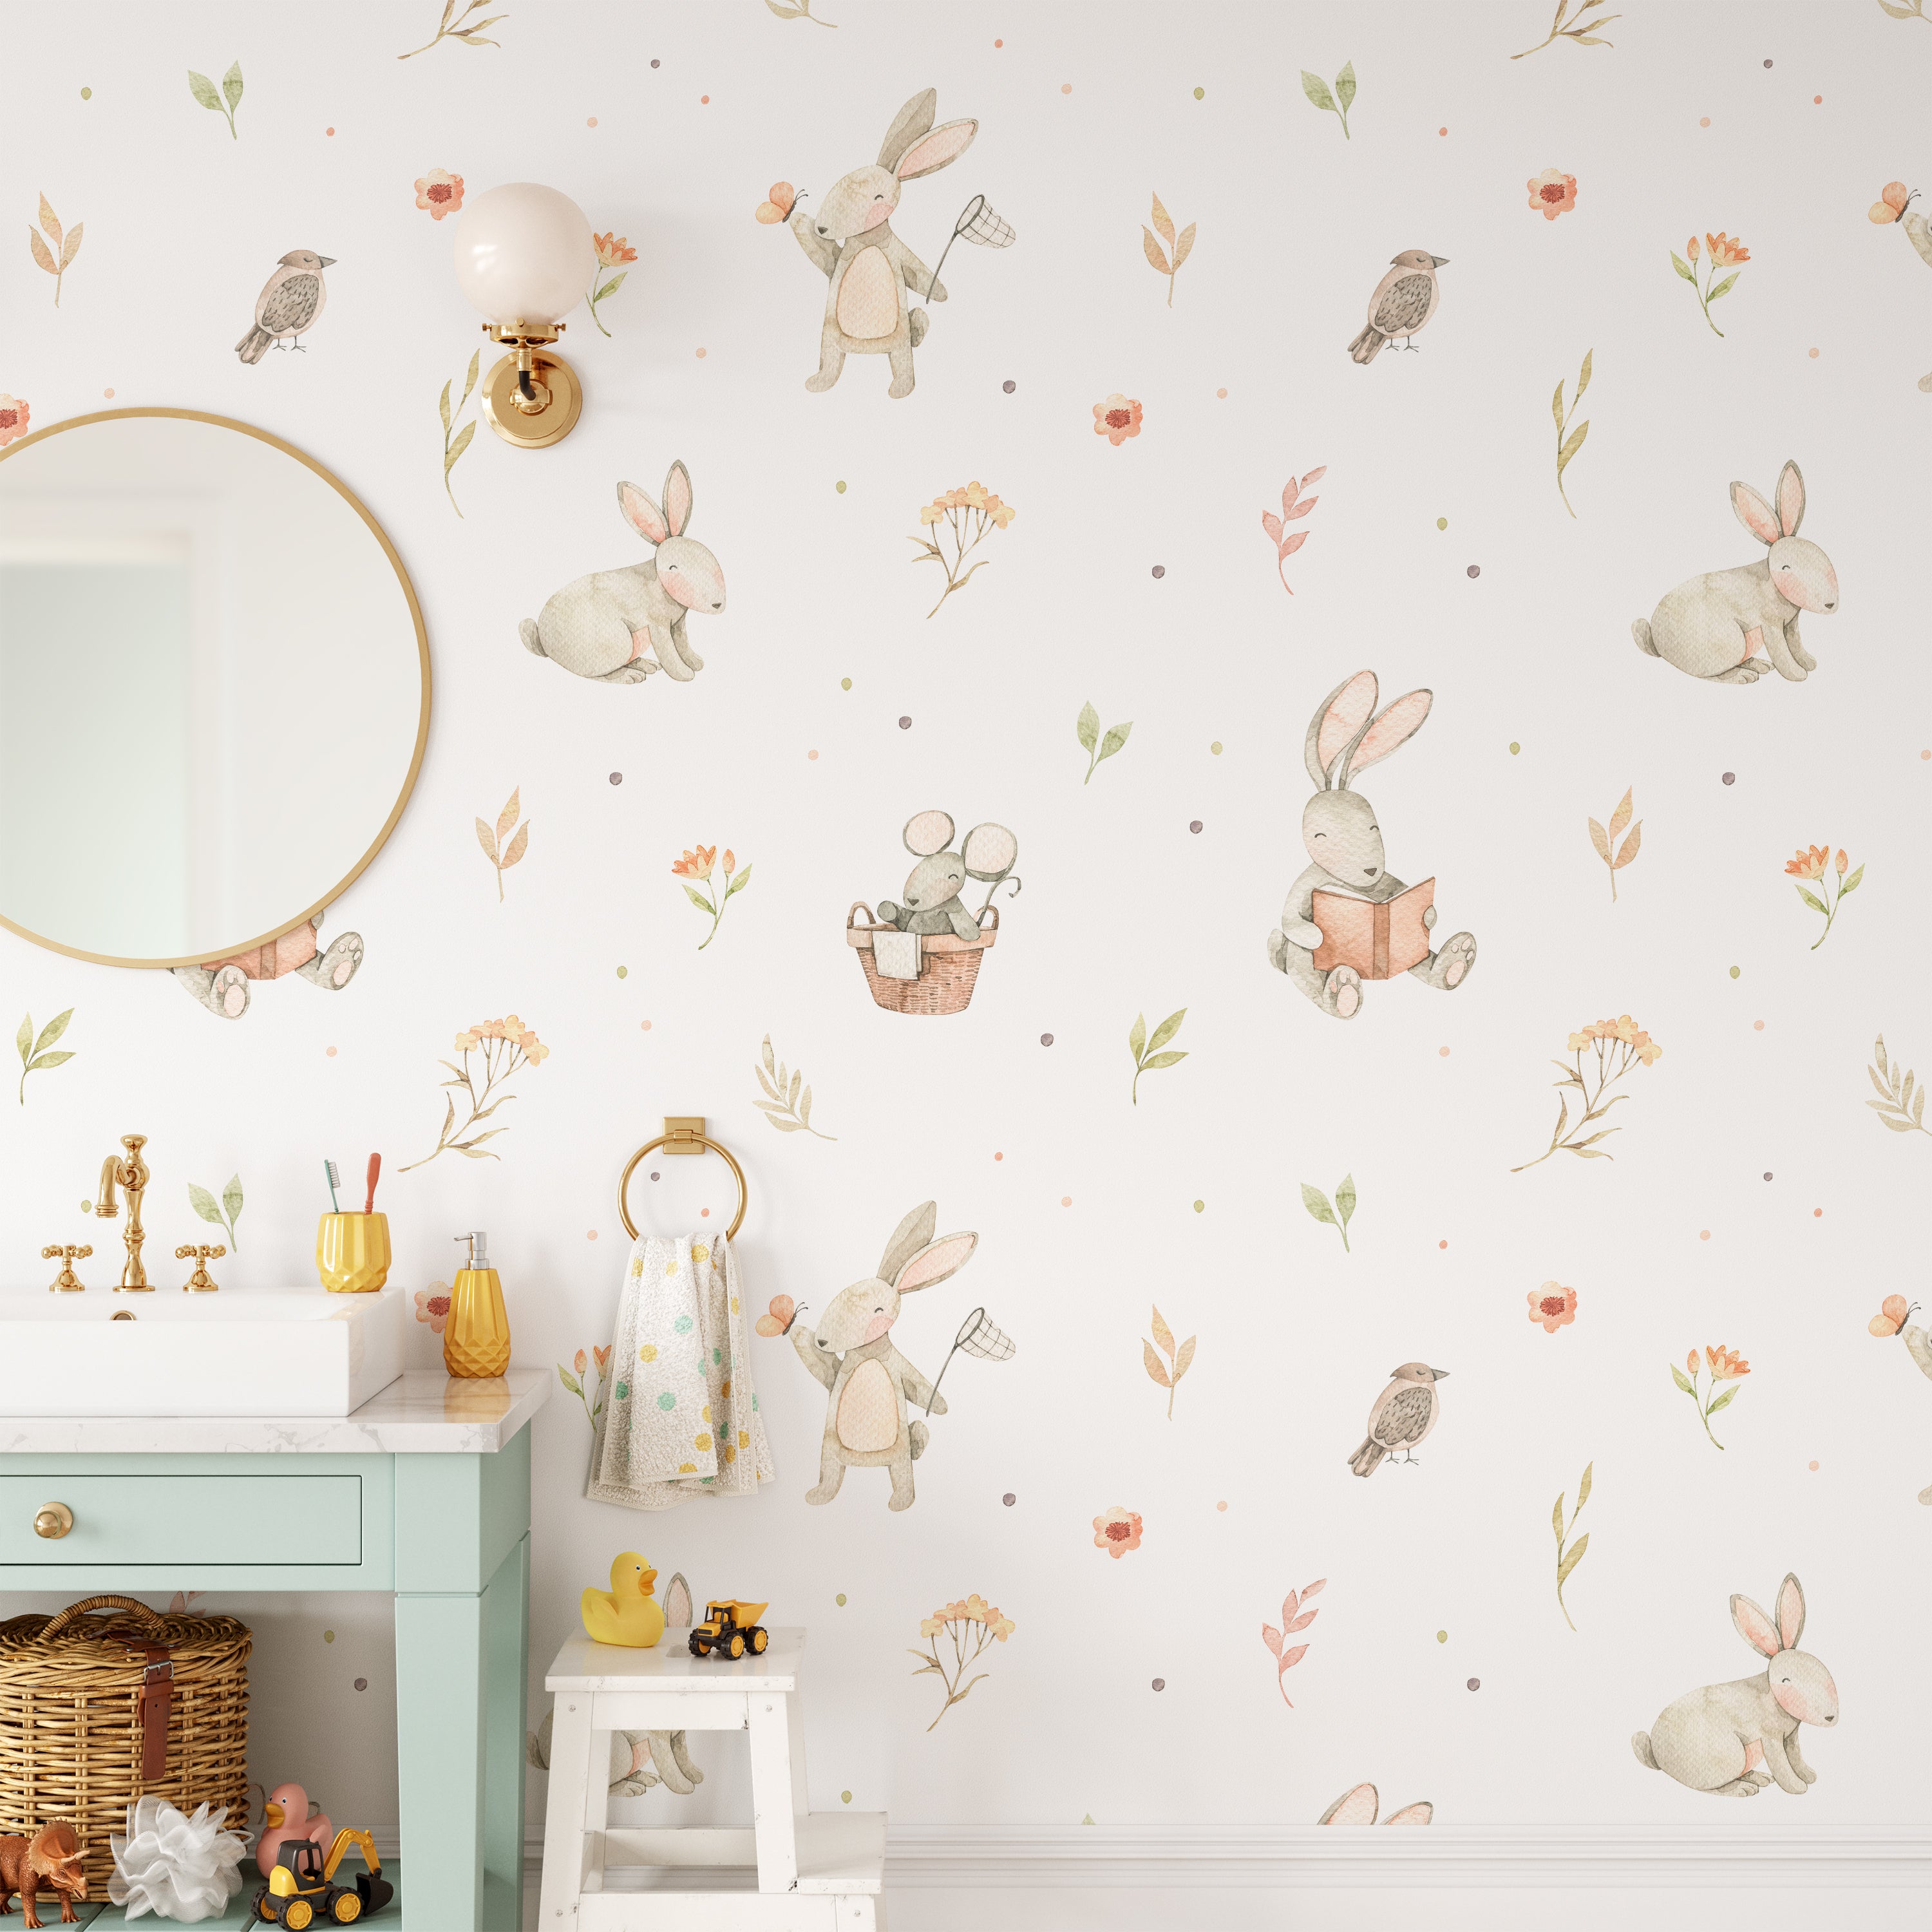 Buy Peel and Stick Wallpaper Removable Wallpaper Nursery Wall Online in  India  Etsy